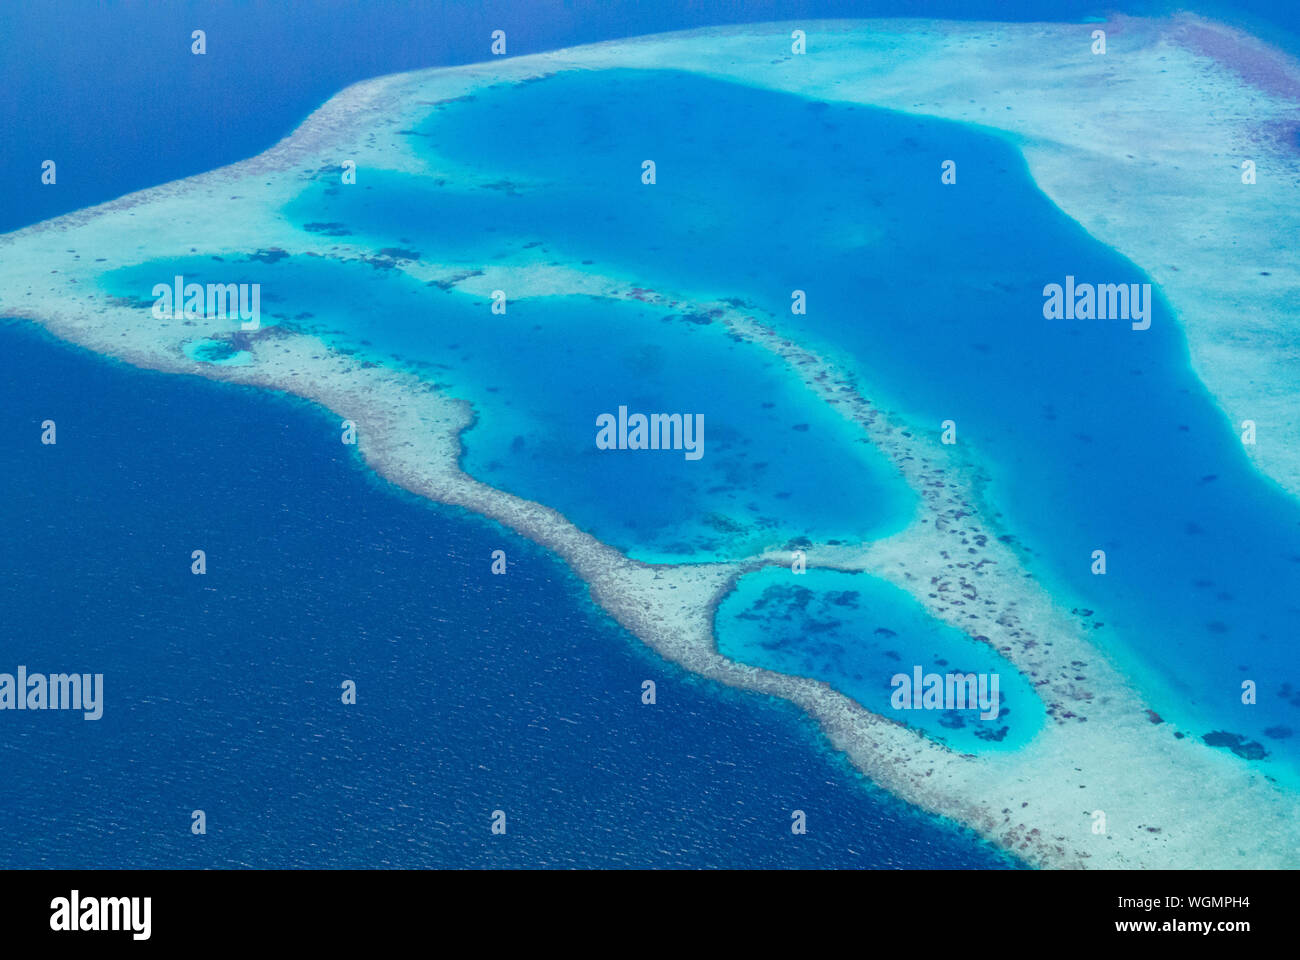 Coral reefs from sky, Maldives island Stock Photo